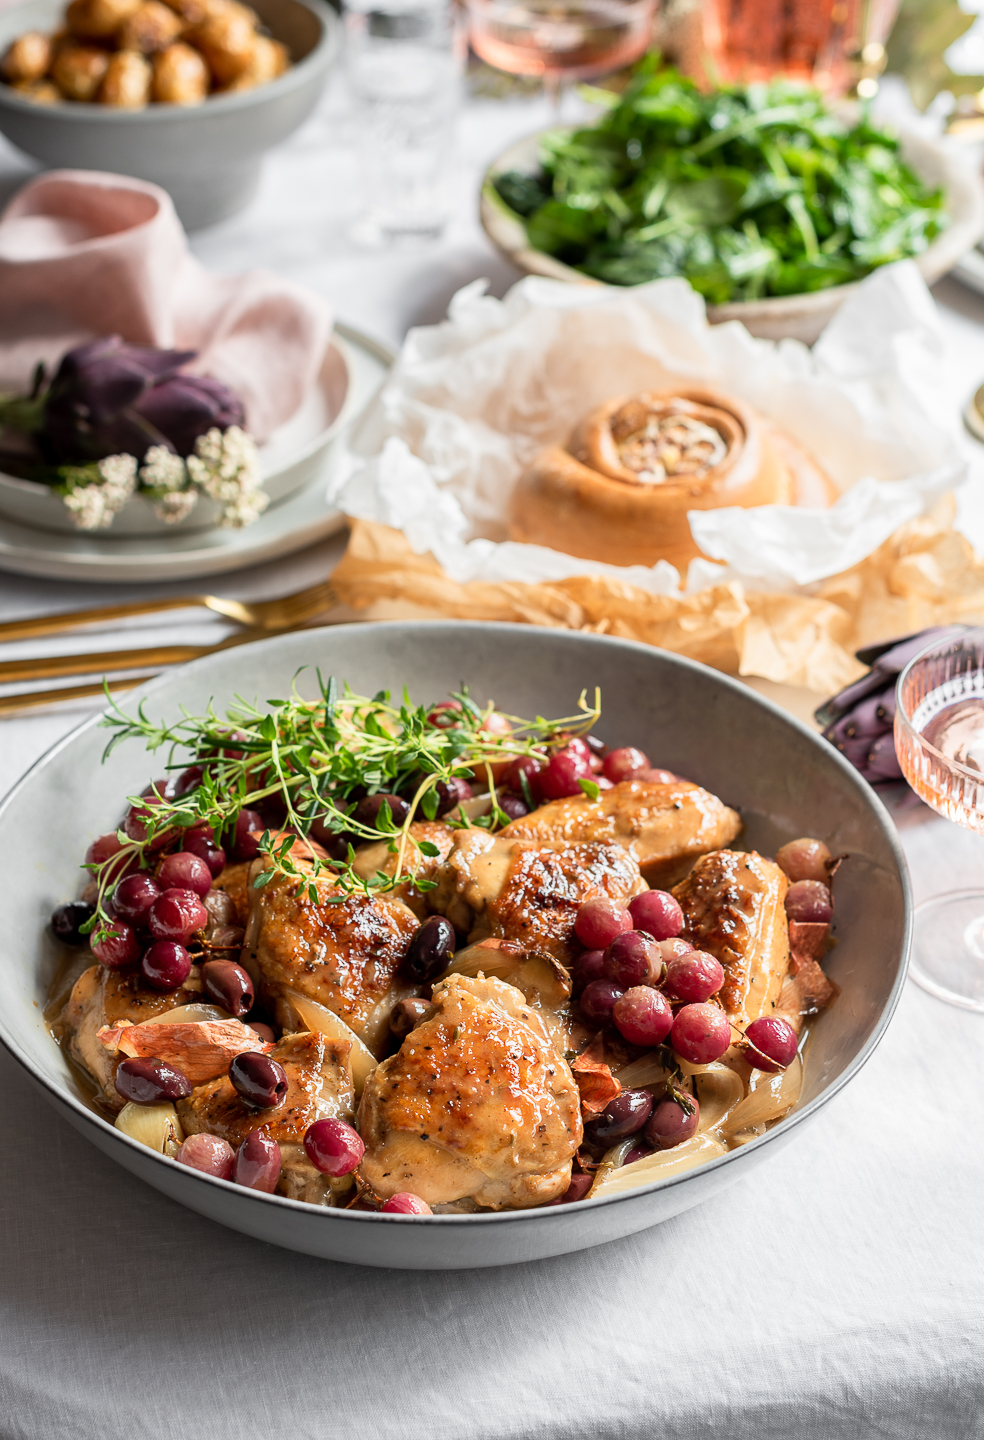 Sticky chicken with roasted grapes